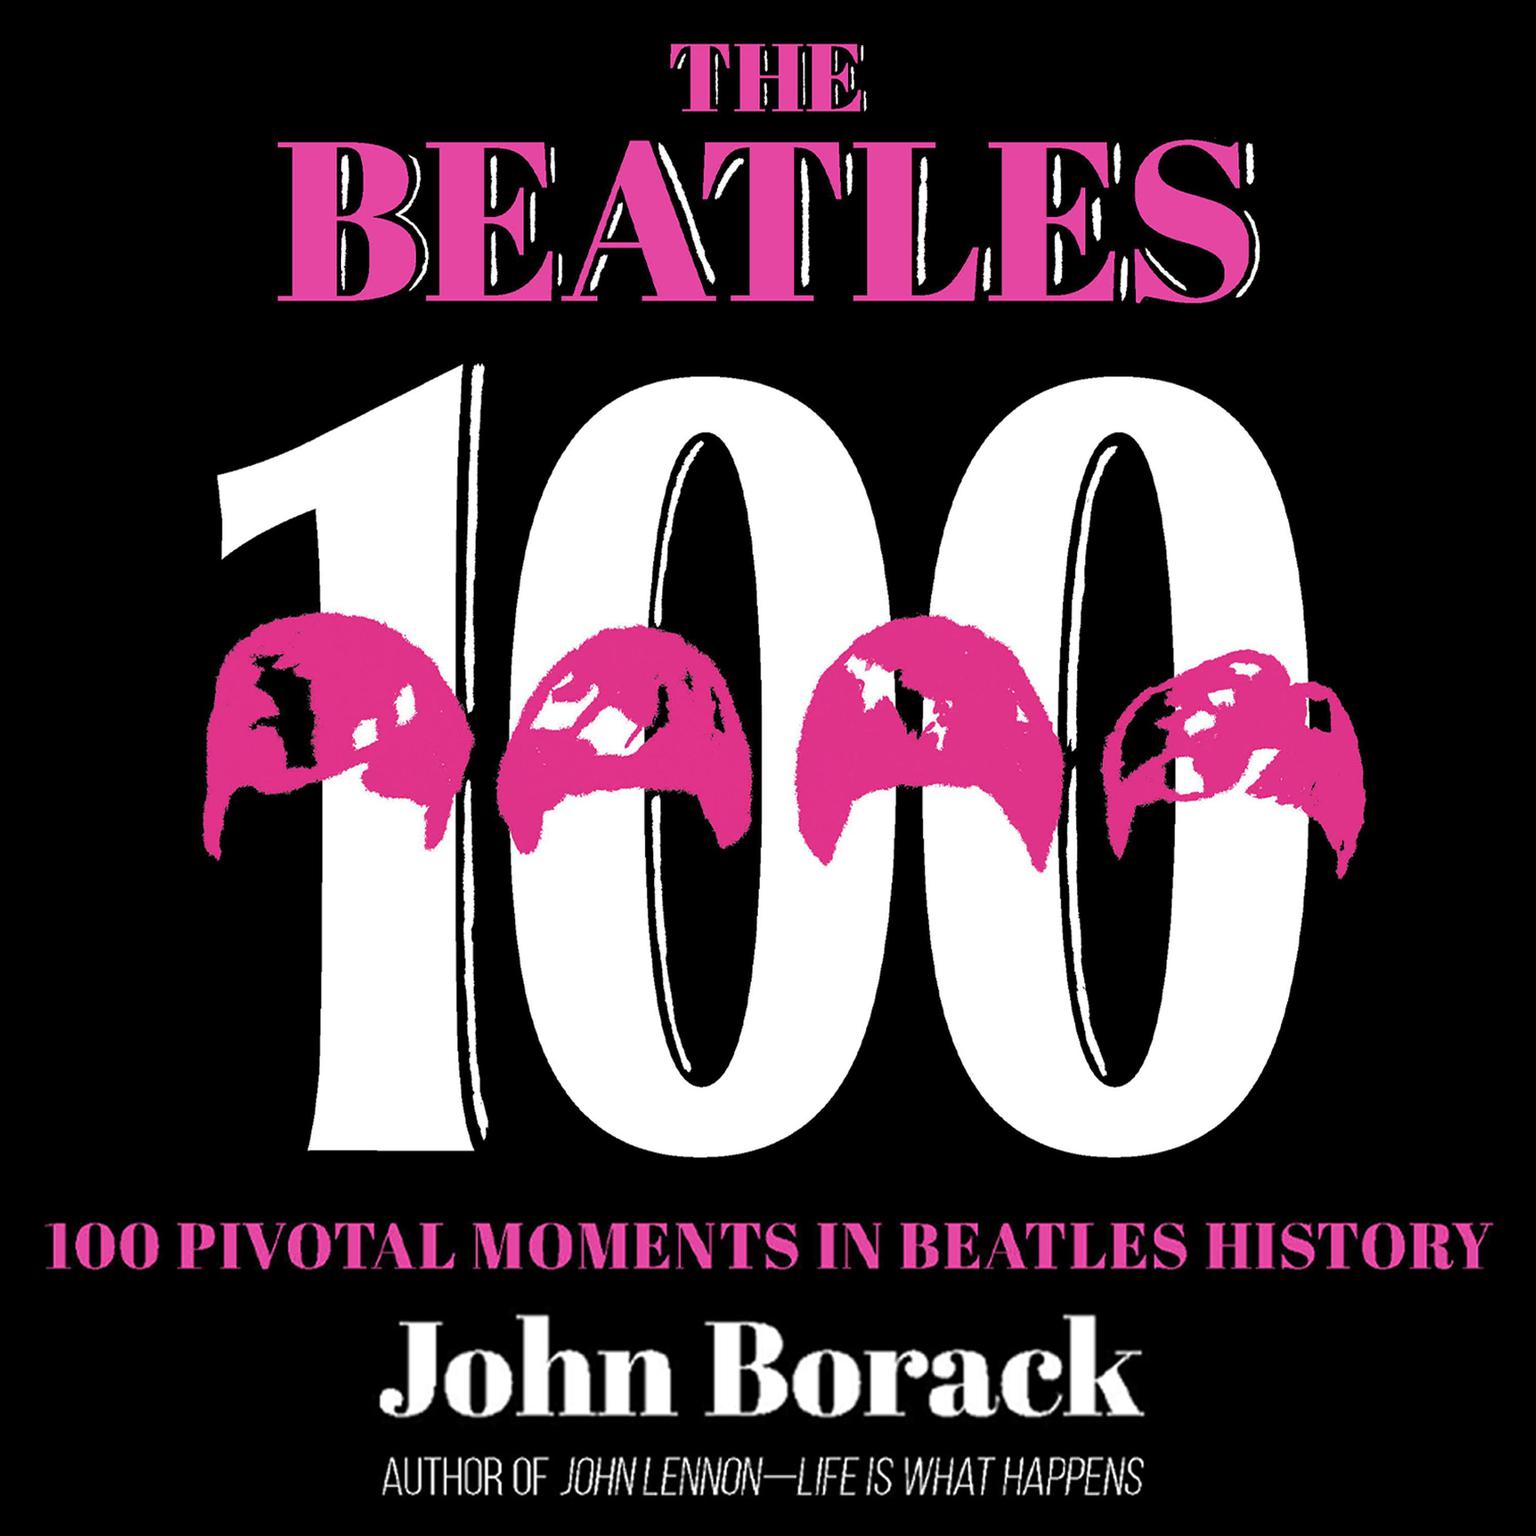 The Beatles 100: 100 Pivotal Moments in Beatles History Audiobook, by John Borack